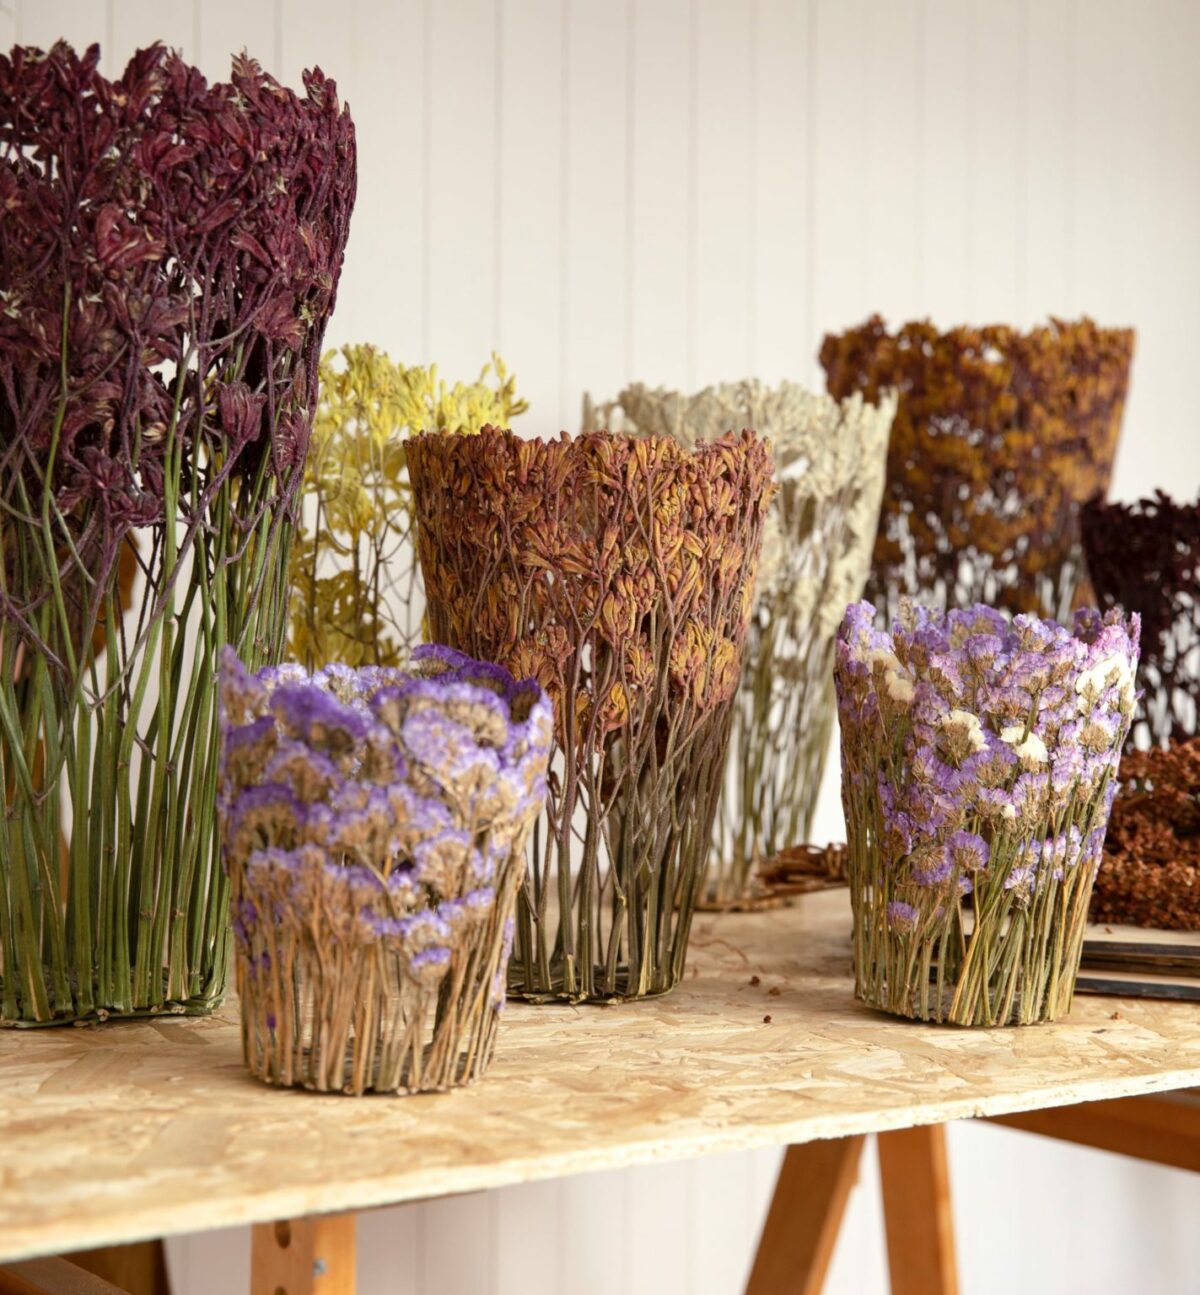 Bouquet Delicate Sculptural Vessels Made Of Dried And Pressed Flowers By Shannon Clegg (9)